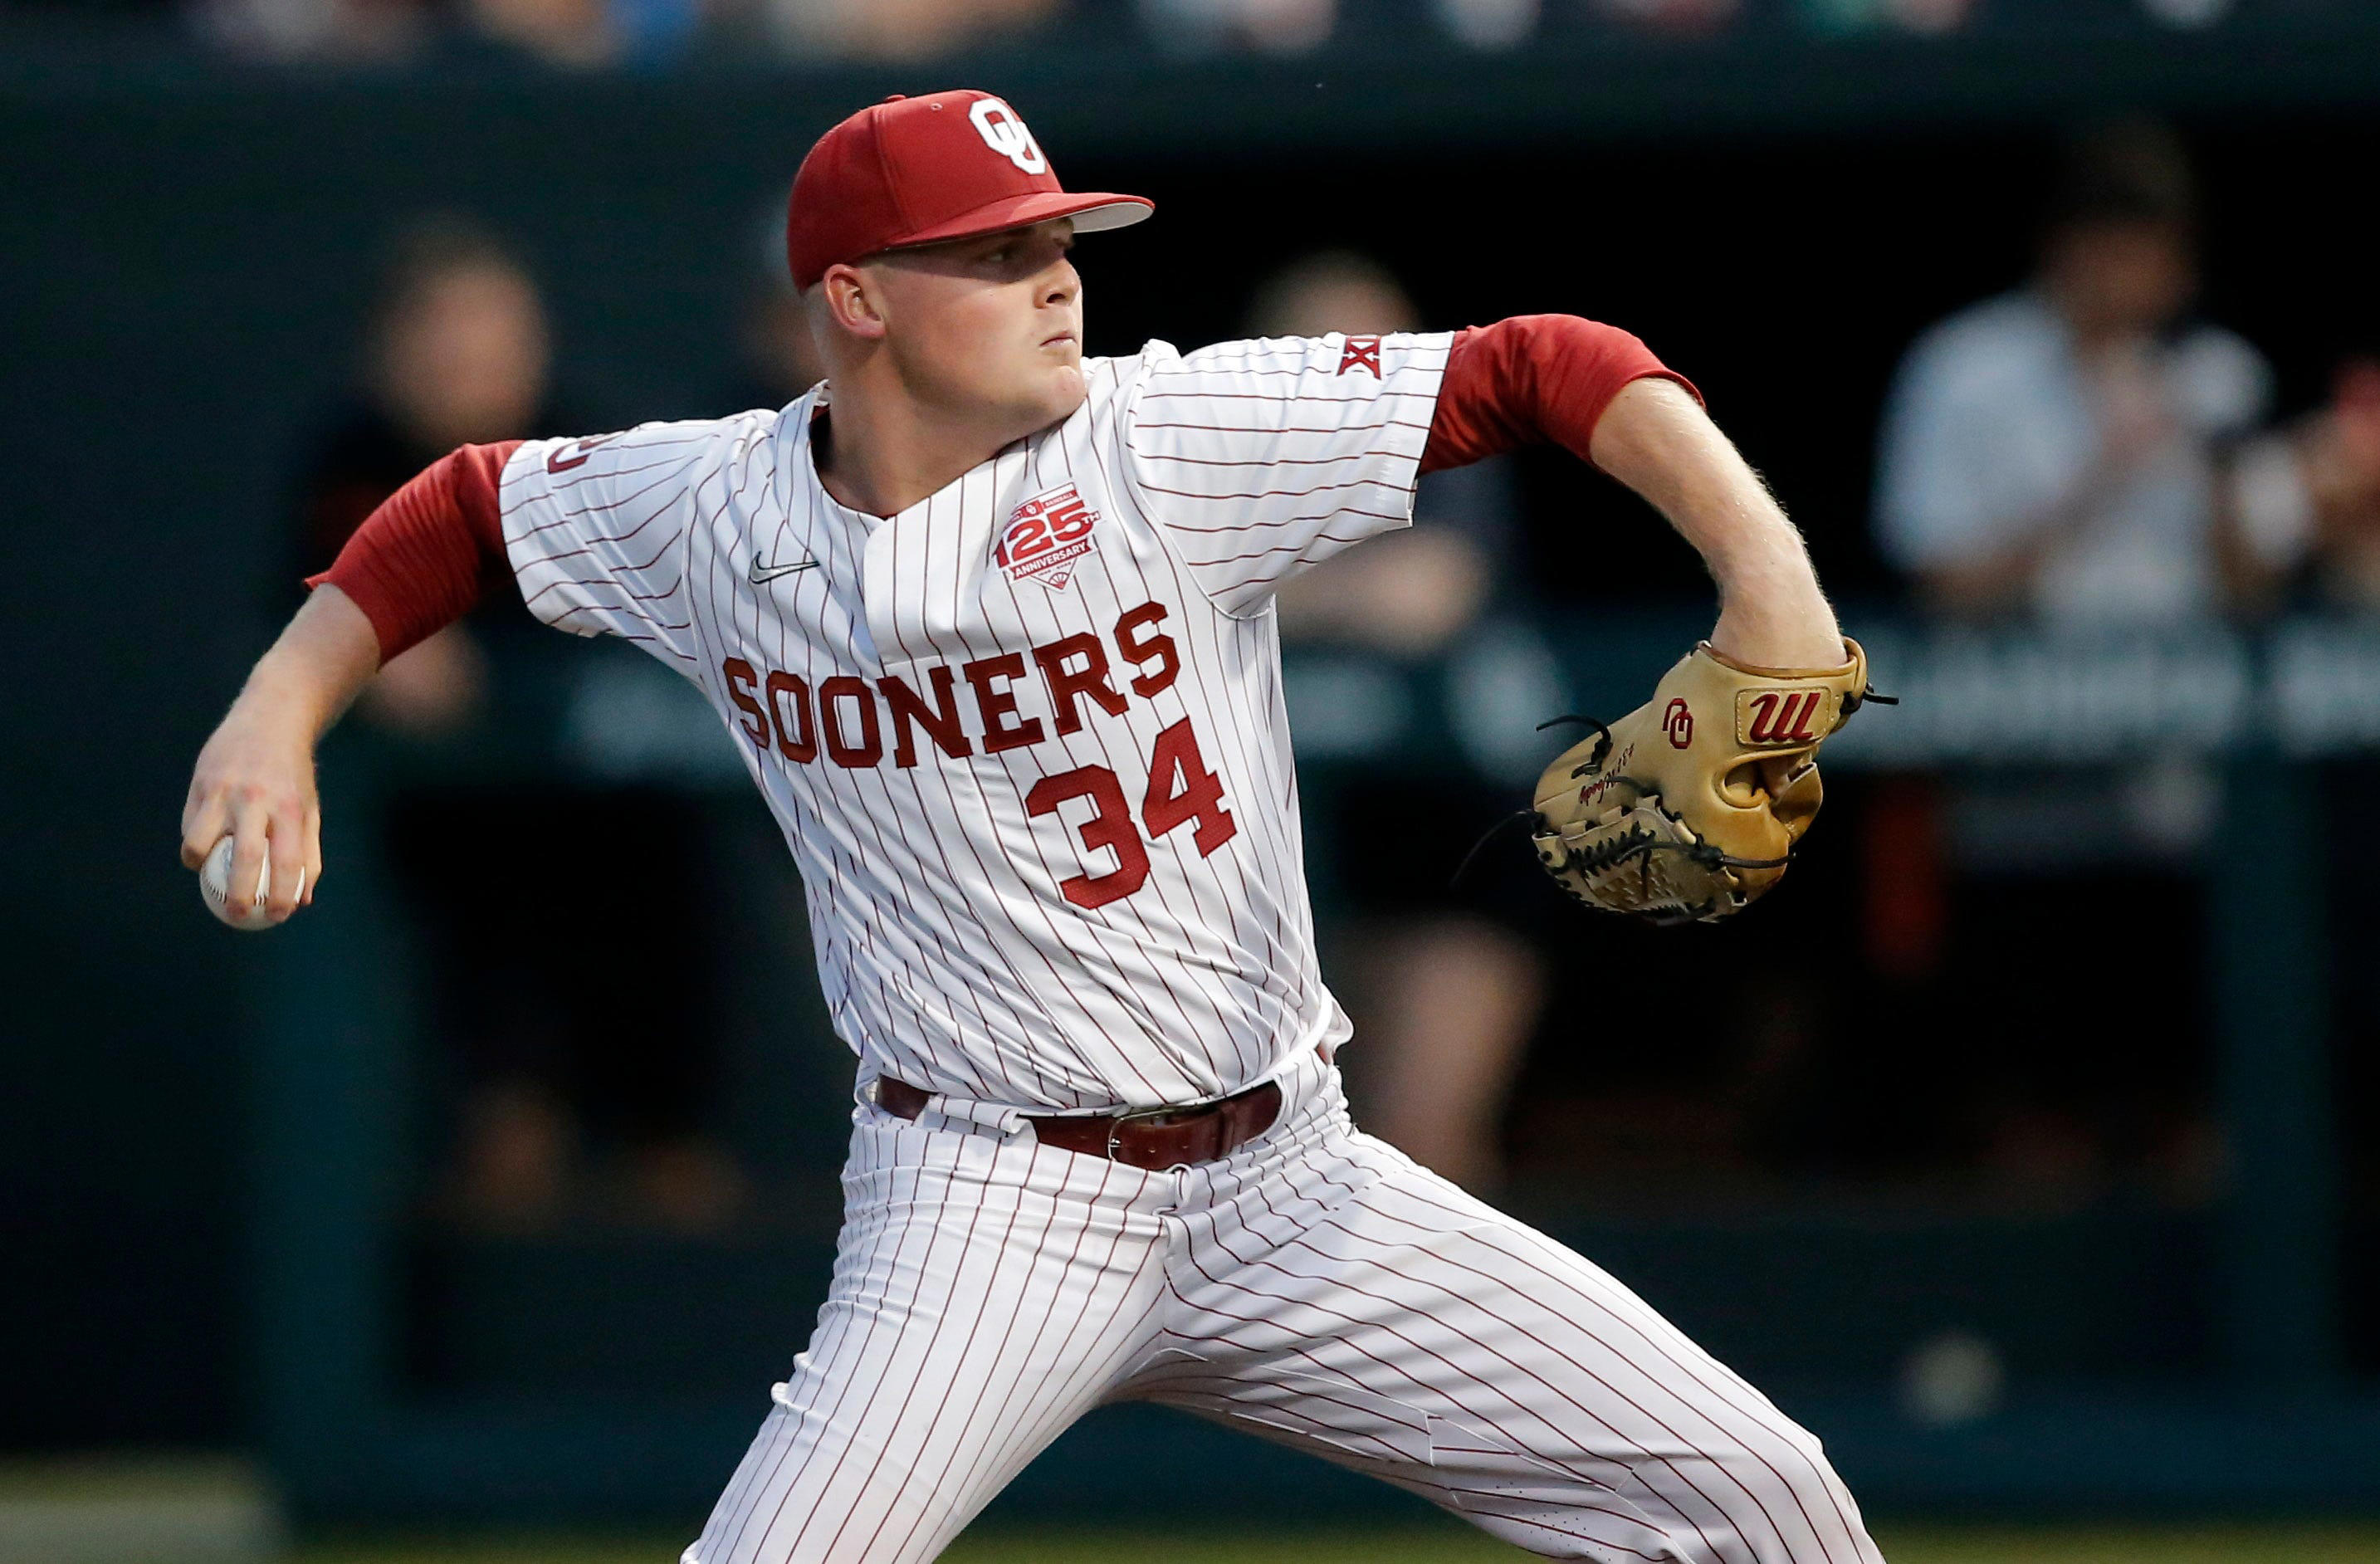 OU vs. OSU baseball score, live updates, highlights from Game 2 of